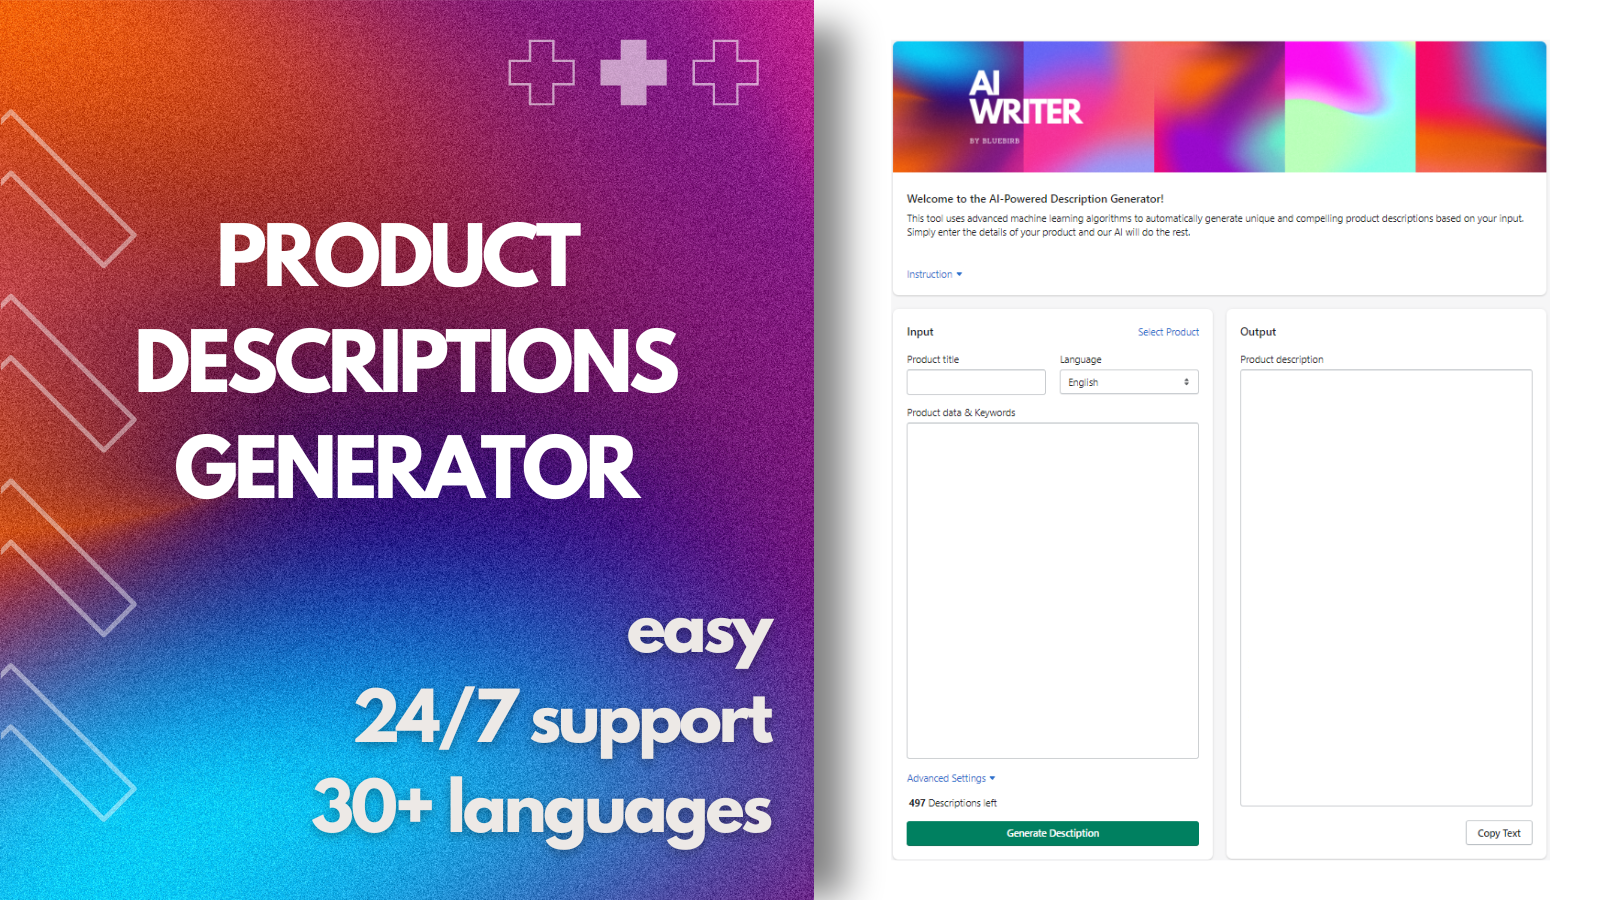 Easy, 24/7 Support, 30+ Languages